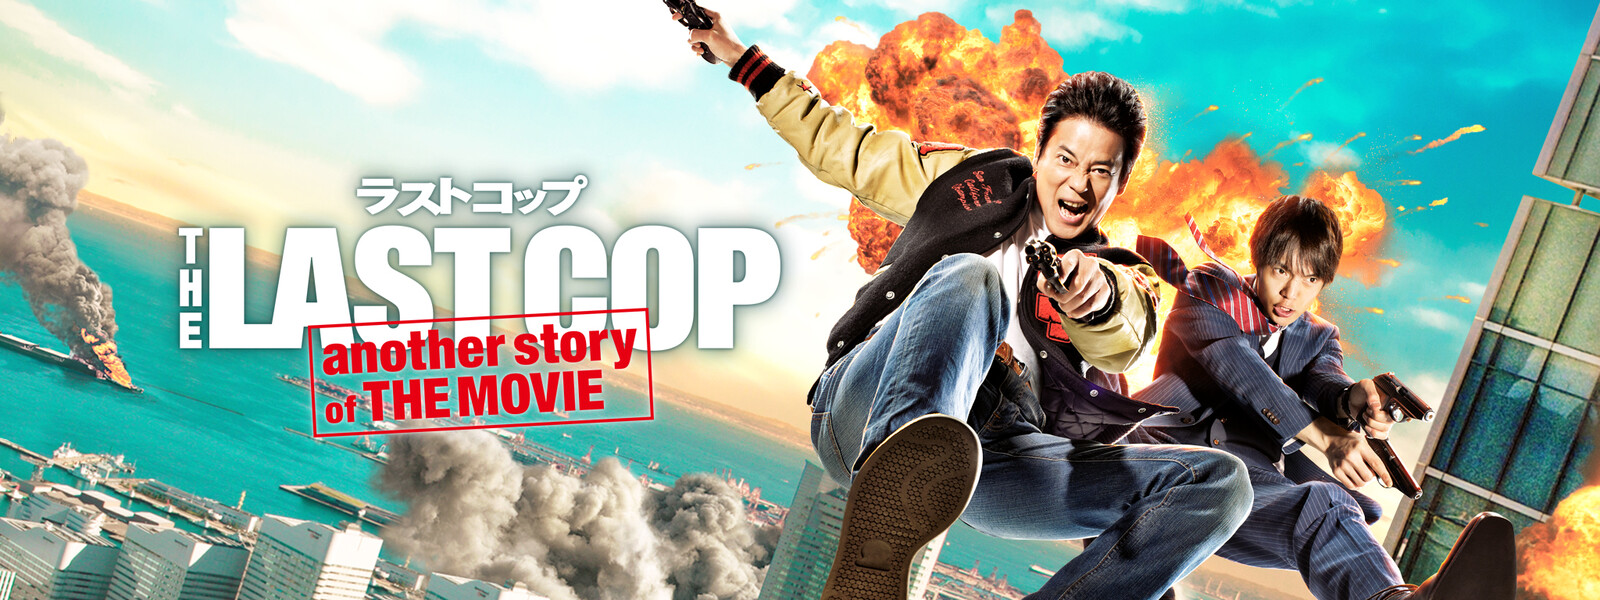 THE LAST COP／ラストコップ シーズン1の動画 - ラストコップ another story of THE MOVIE